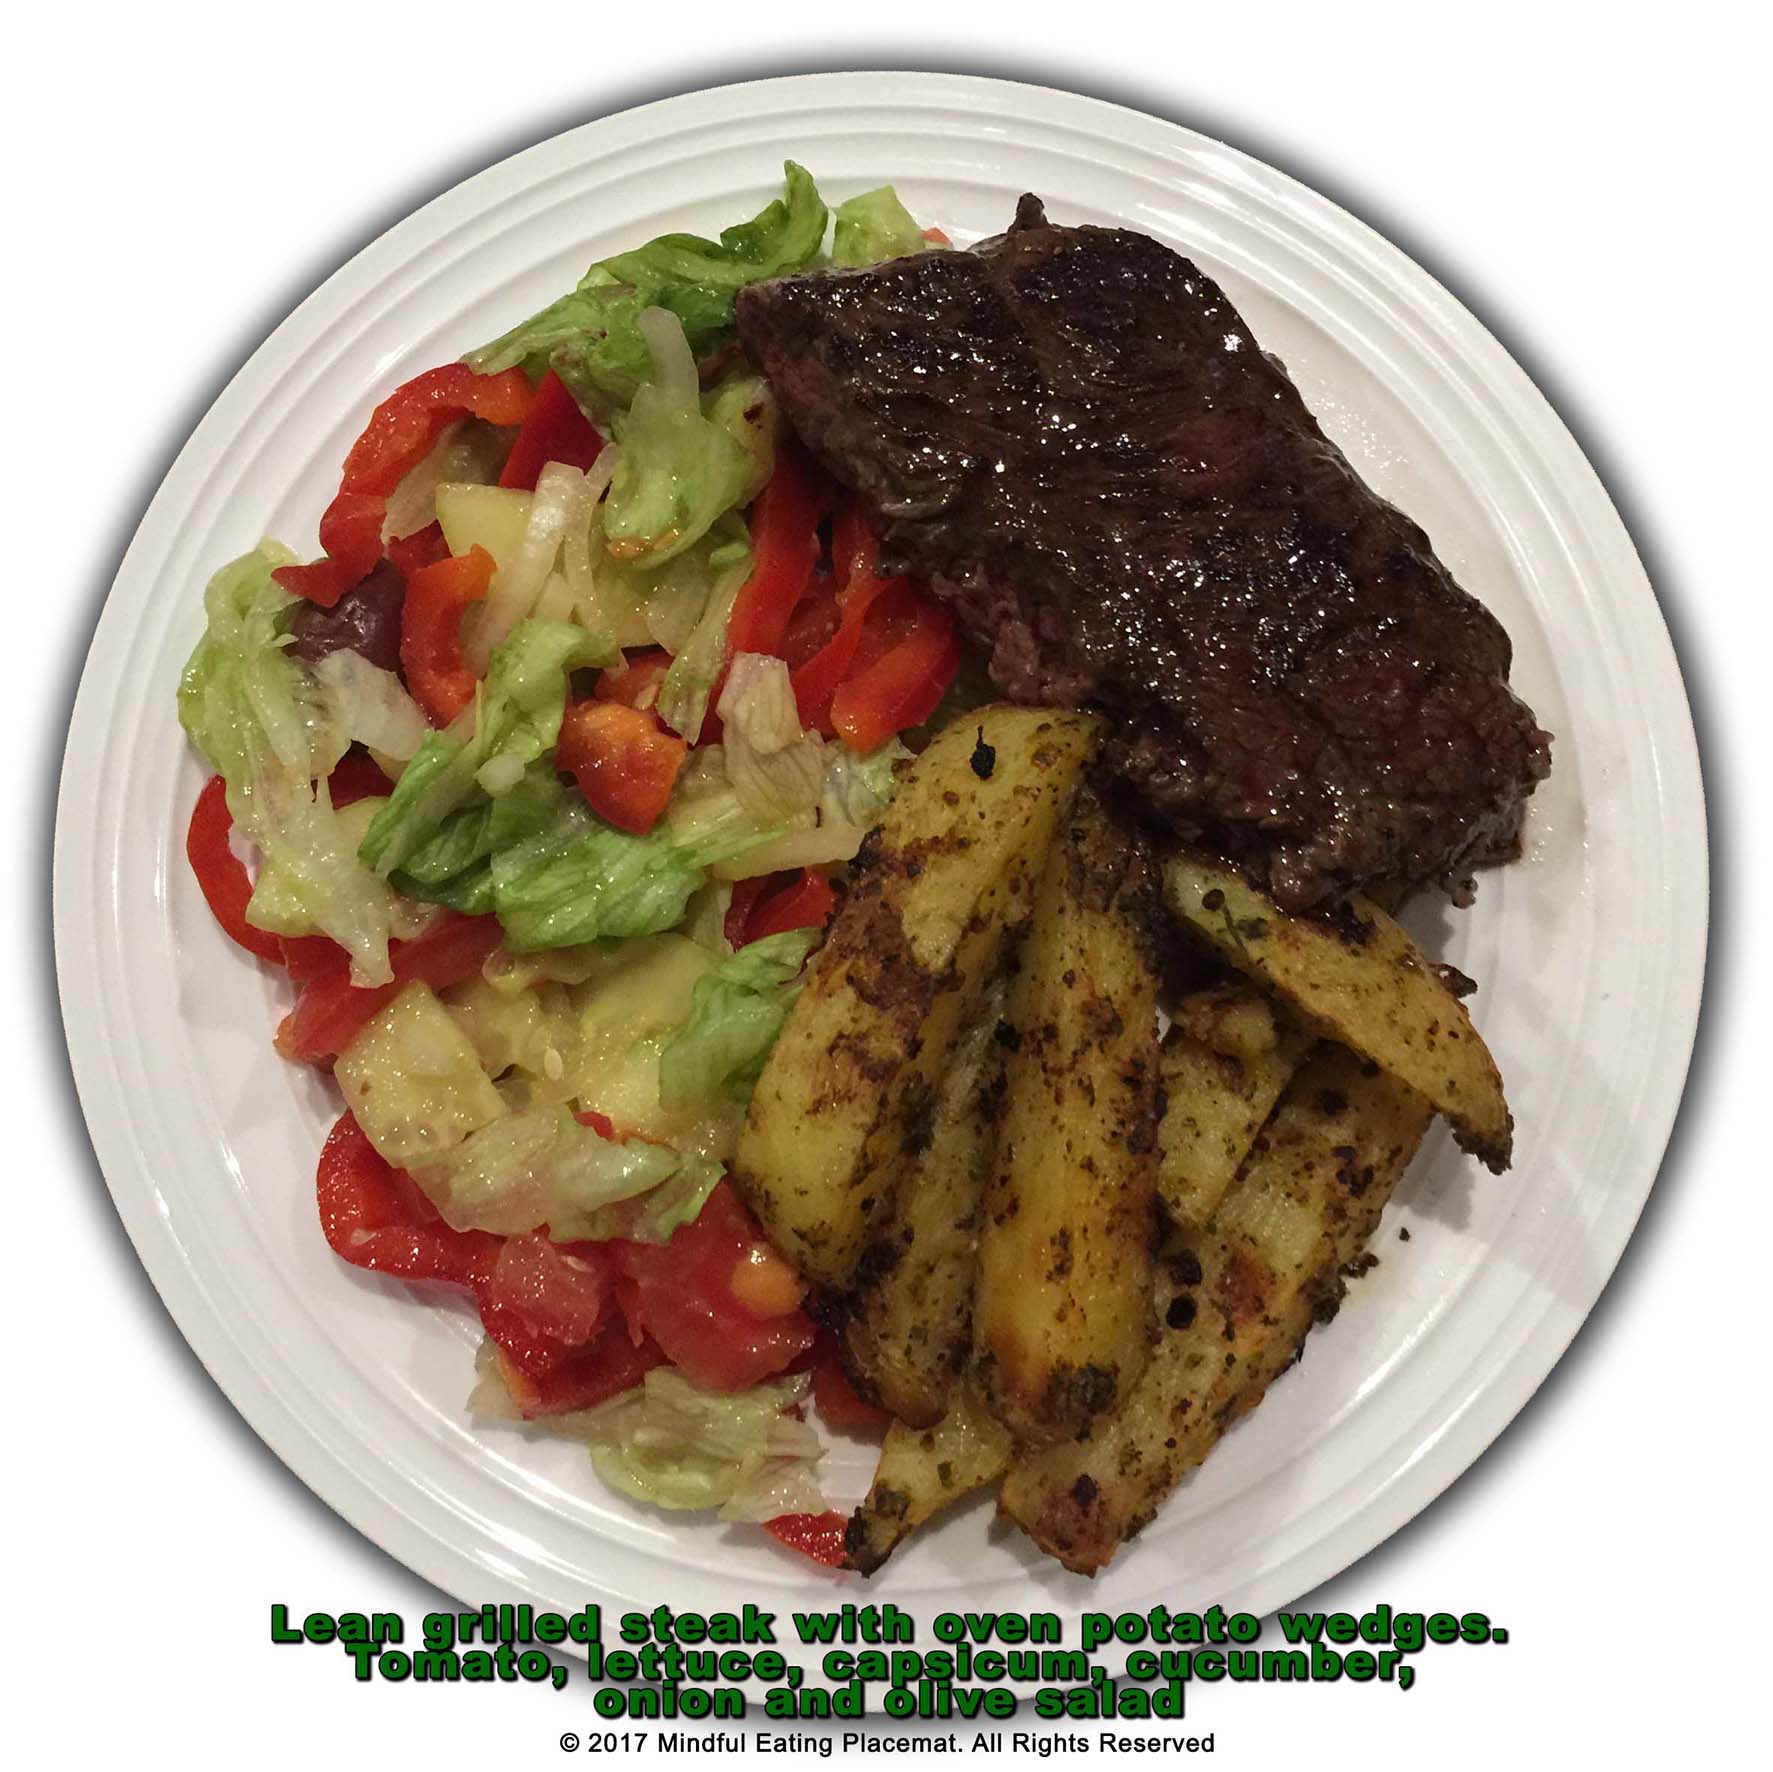 Steak with oven baked herb potato wedges and side salad